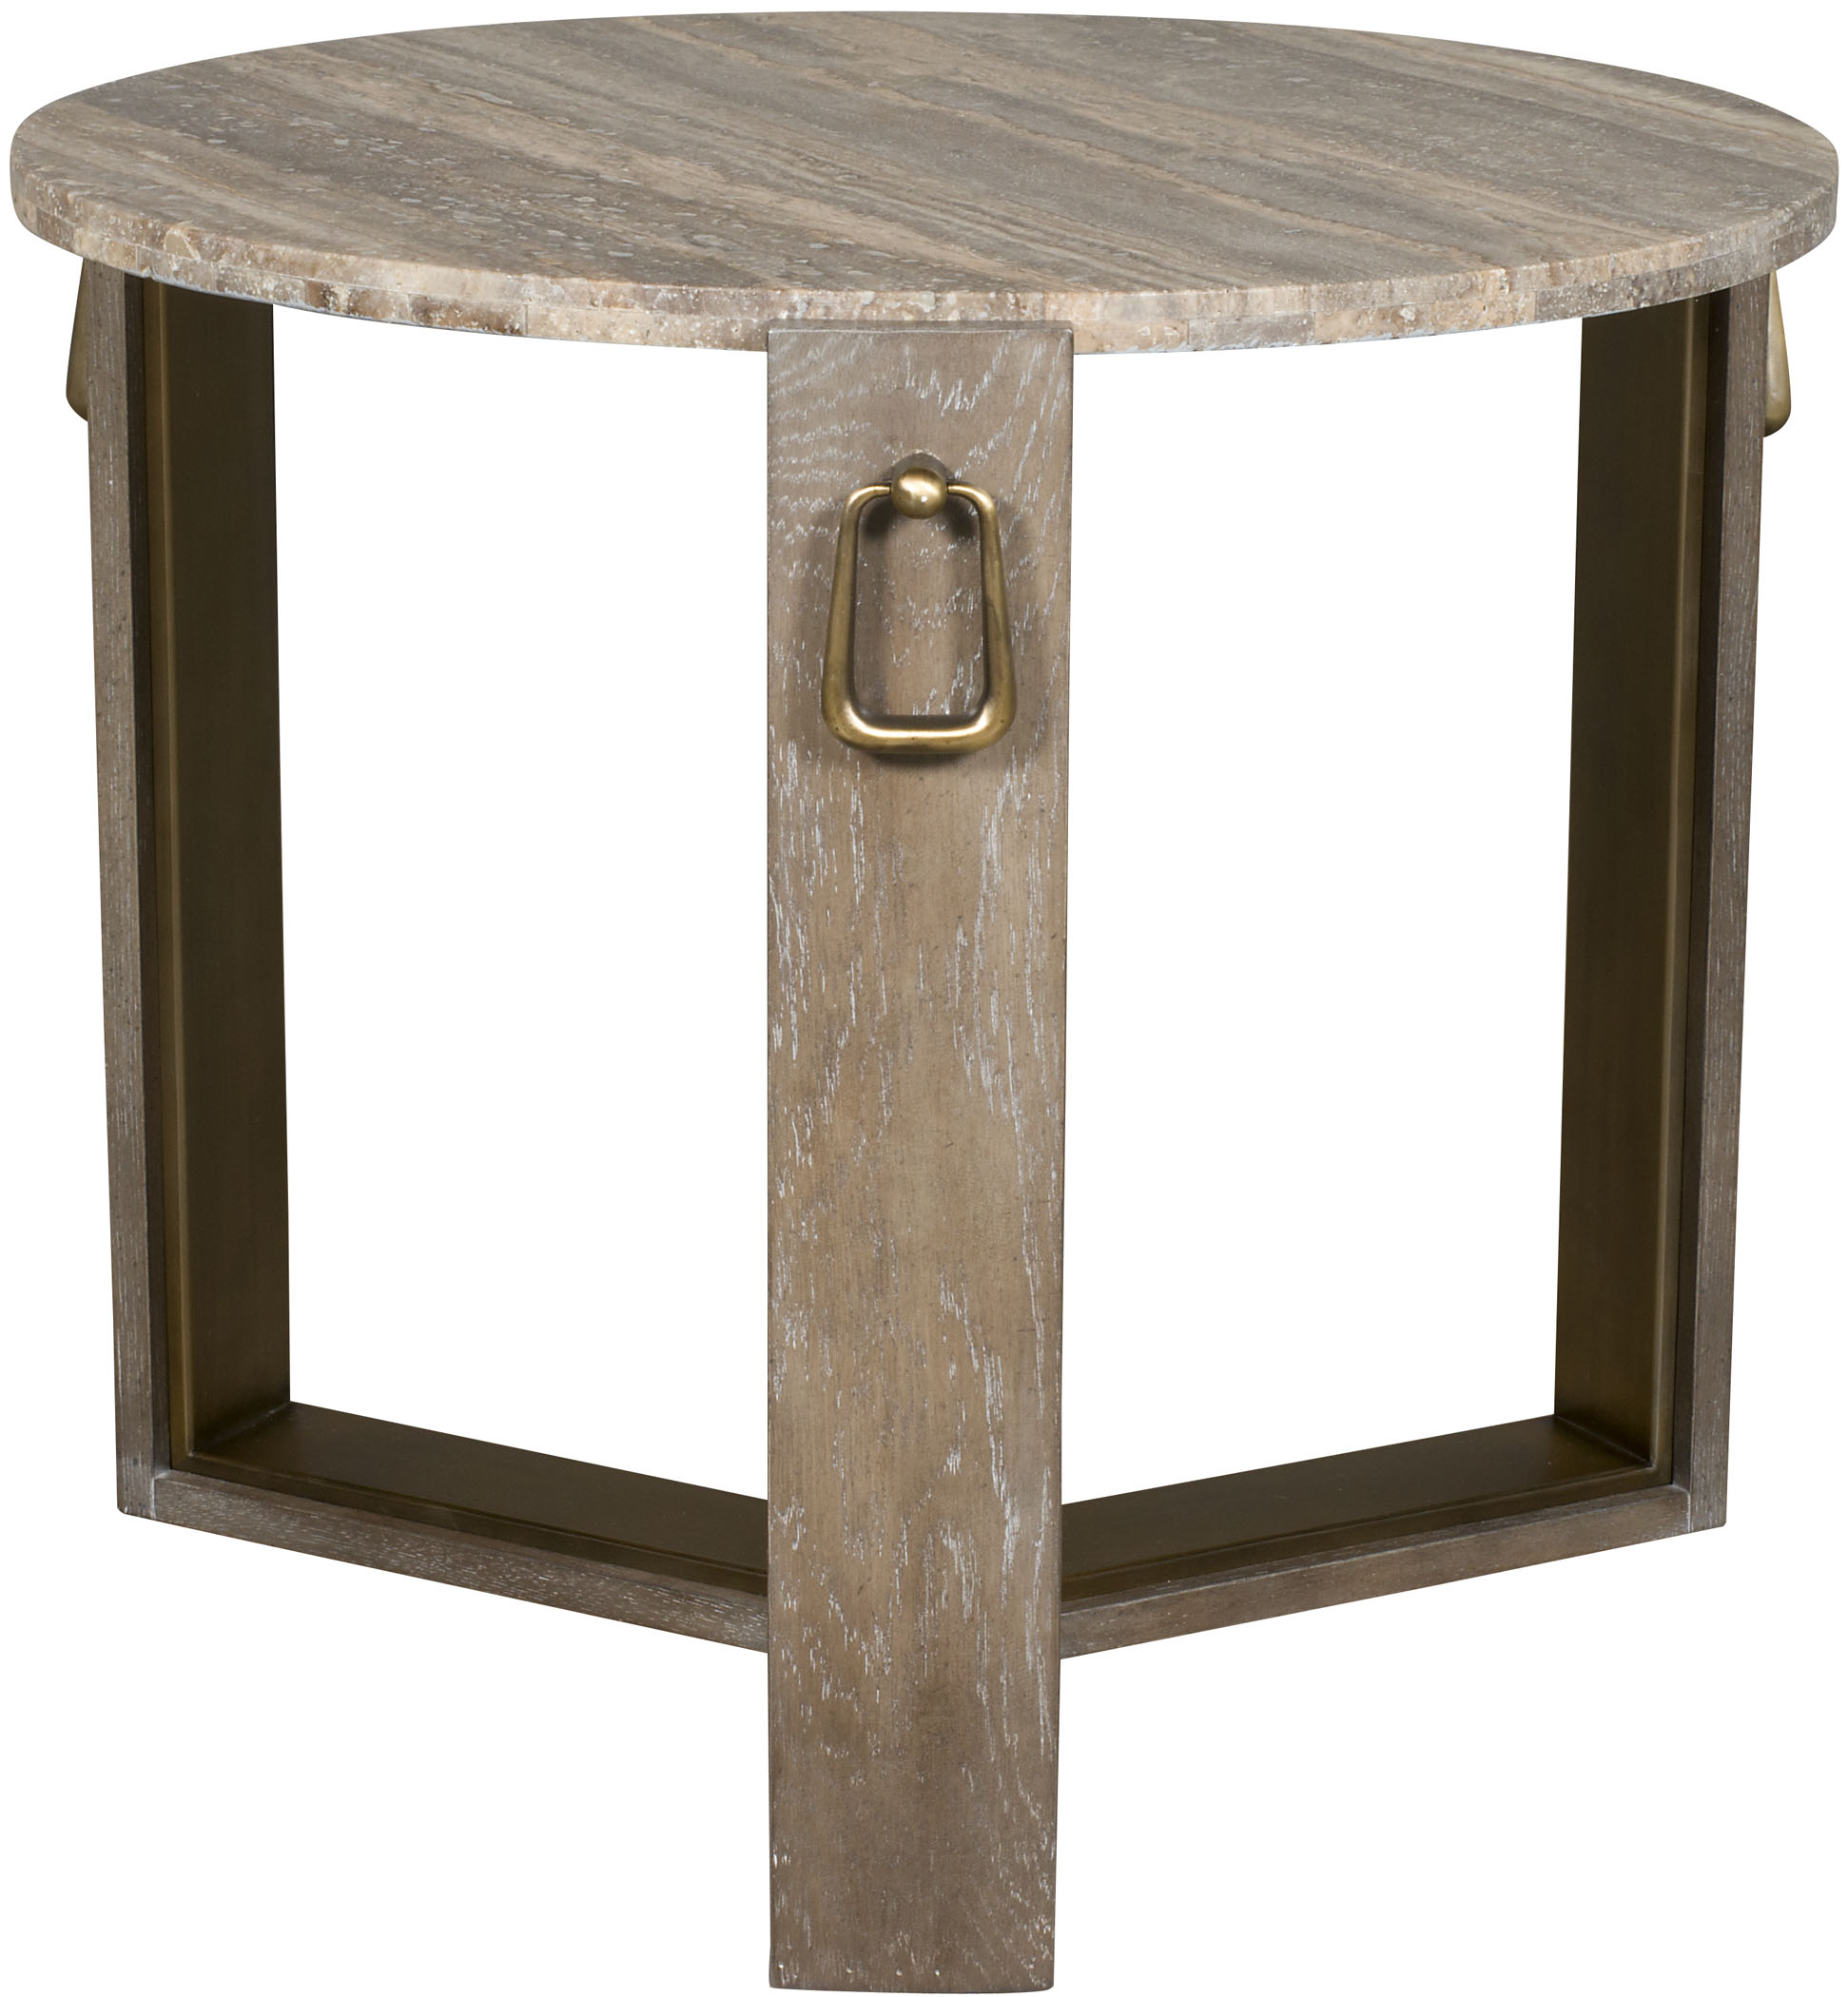 Pen Yan Side Table 9555E-HM - Our Products - Vanguard Furniture